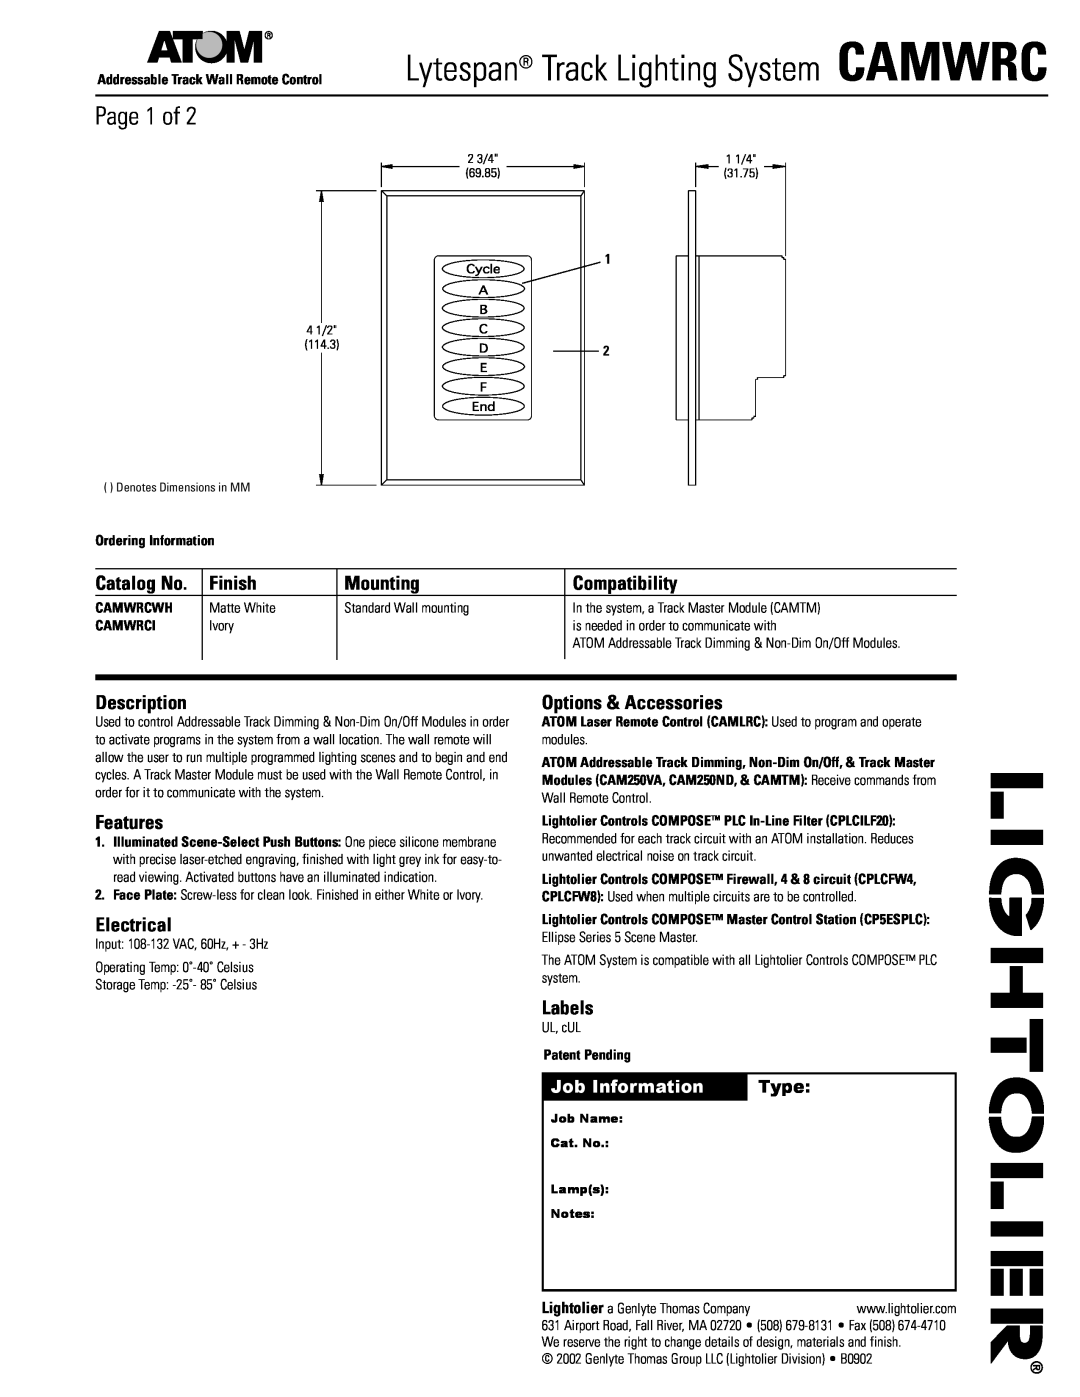 Lightolier dimensions Lytespan Track Lighting System CAMWRC, Page 1 of, Finish, Mounting, Compatibility, Description 